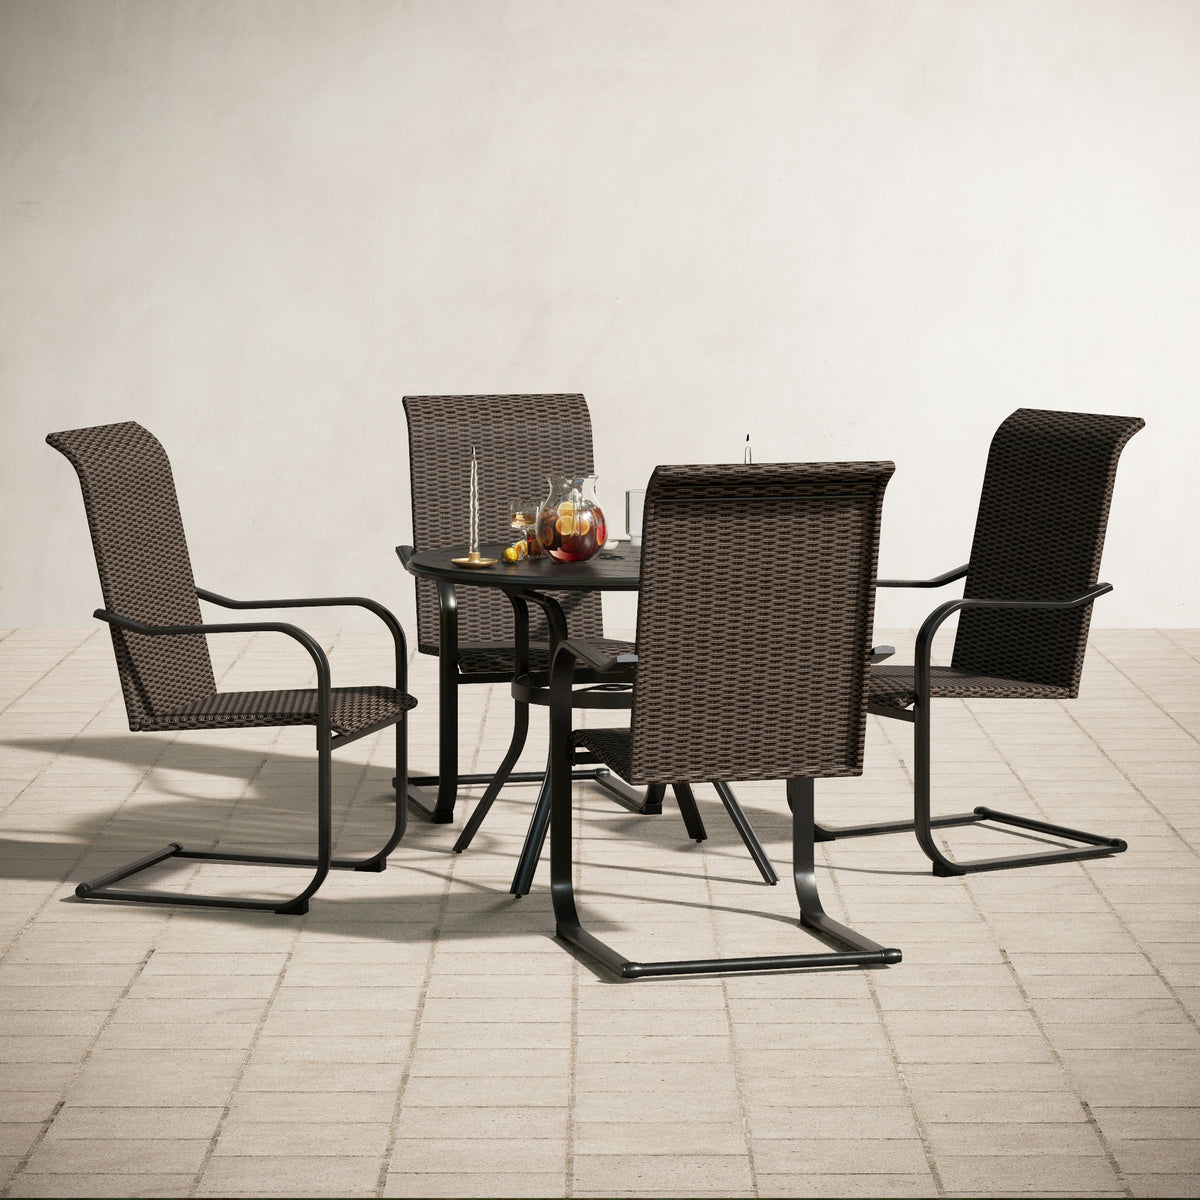 Sophia & William Steel Round Table & 4 Rattan C-spring Chairs Outdoor Dining Set